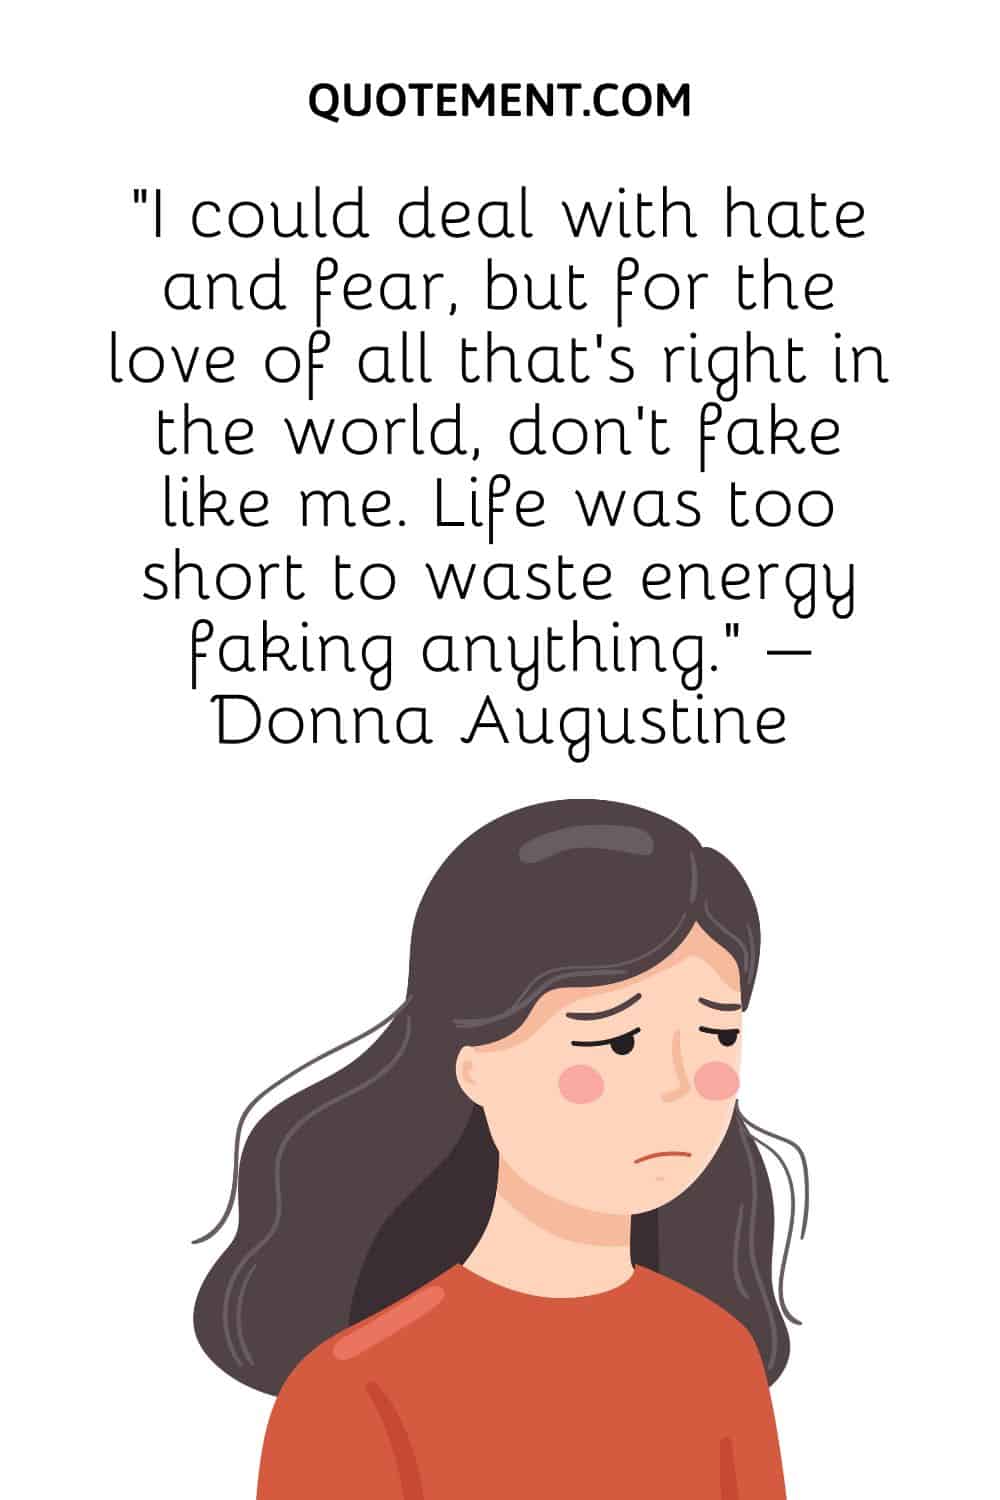 “I could deal with hate and fear, but for the love of all that's right in the world, don't fake like me. Life was too short to waste energy faking anything.” – Donna Augustine